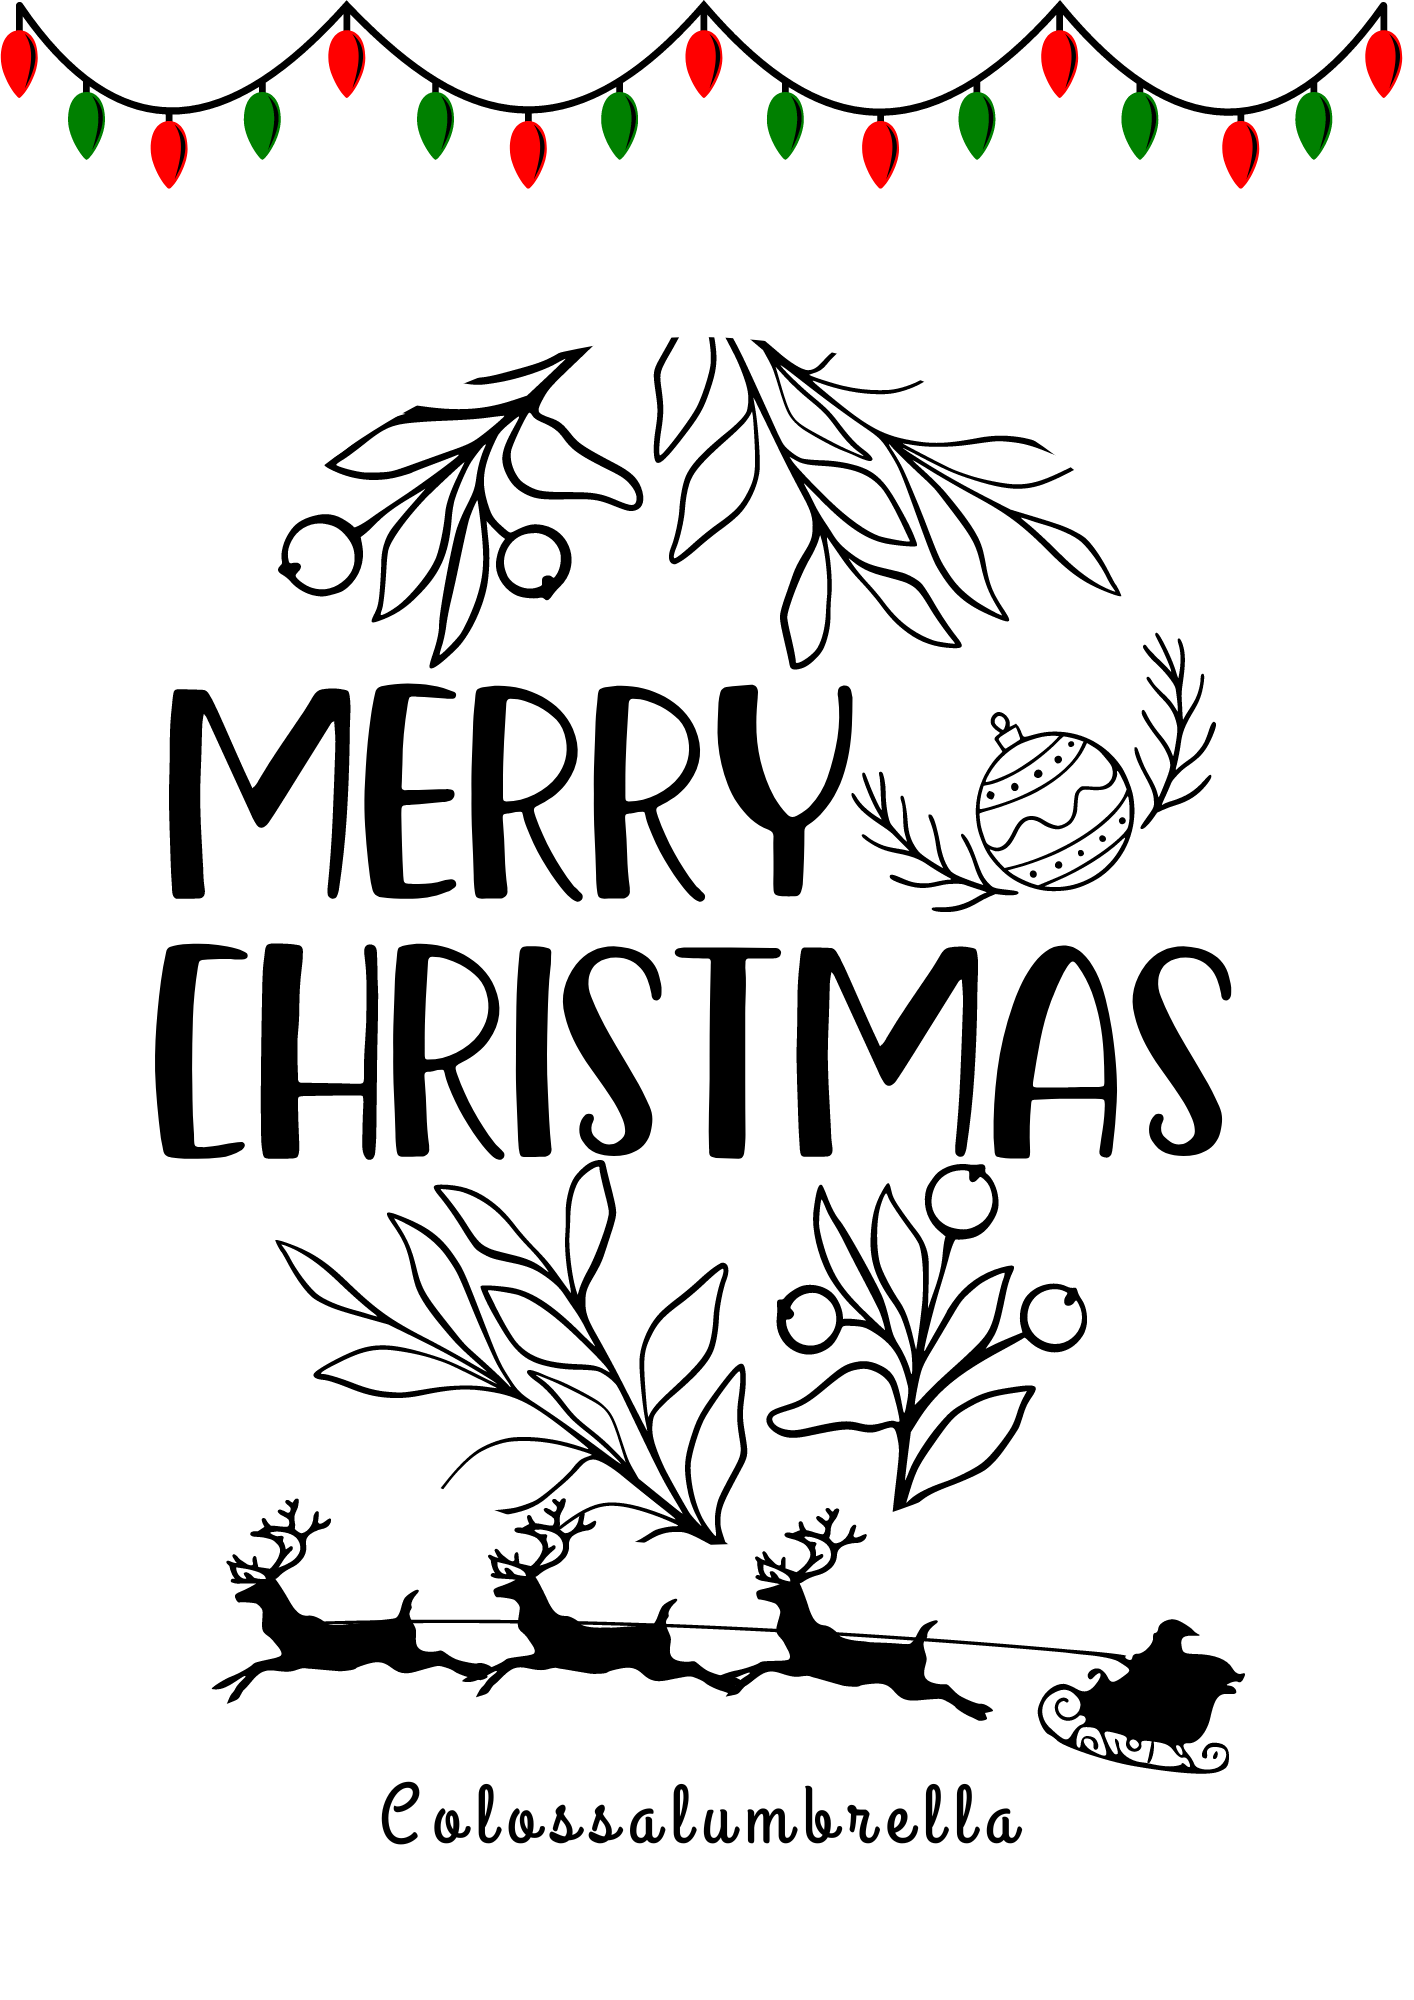 11 Christmas coloring pages free printable for Some Holiday Fun!